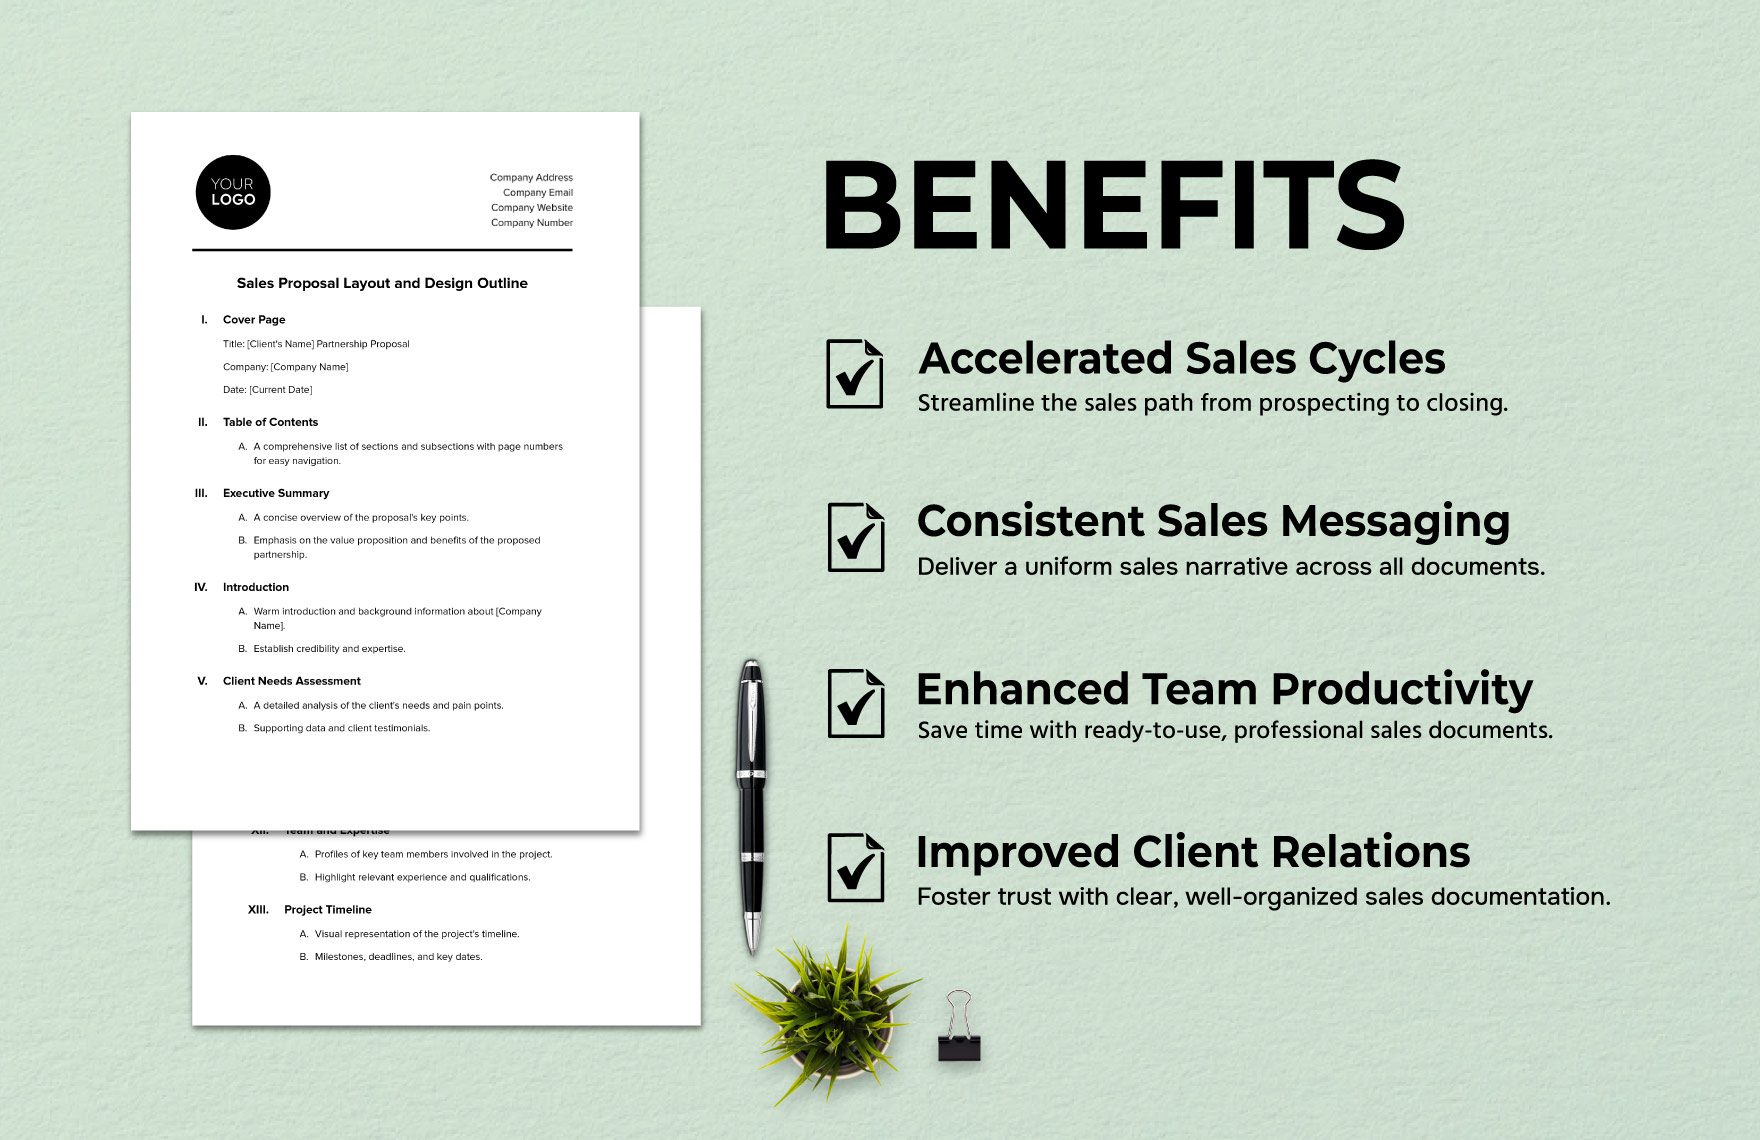 Sales Proposal Layout and Design Outline Template